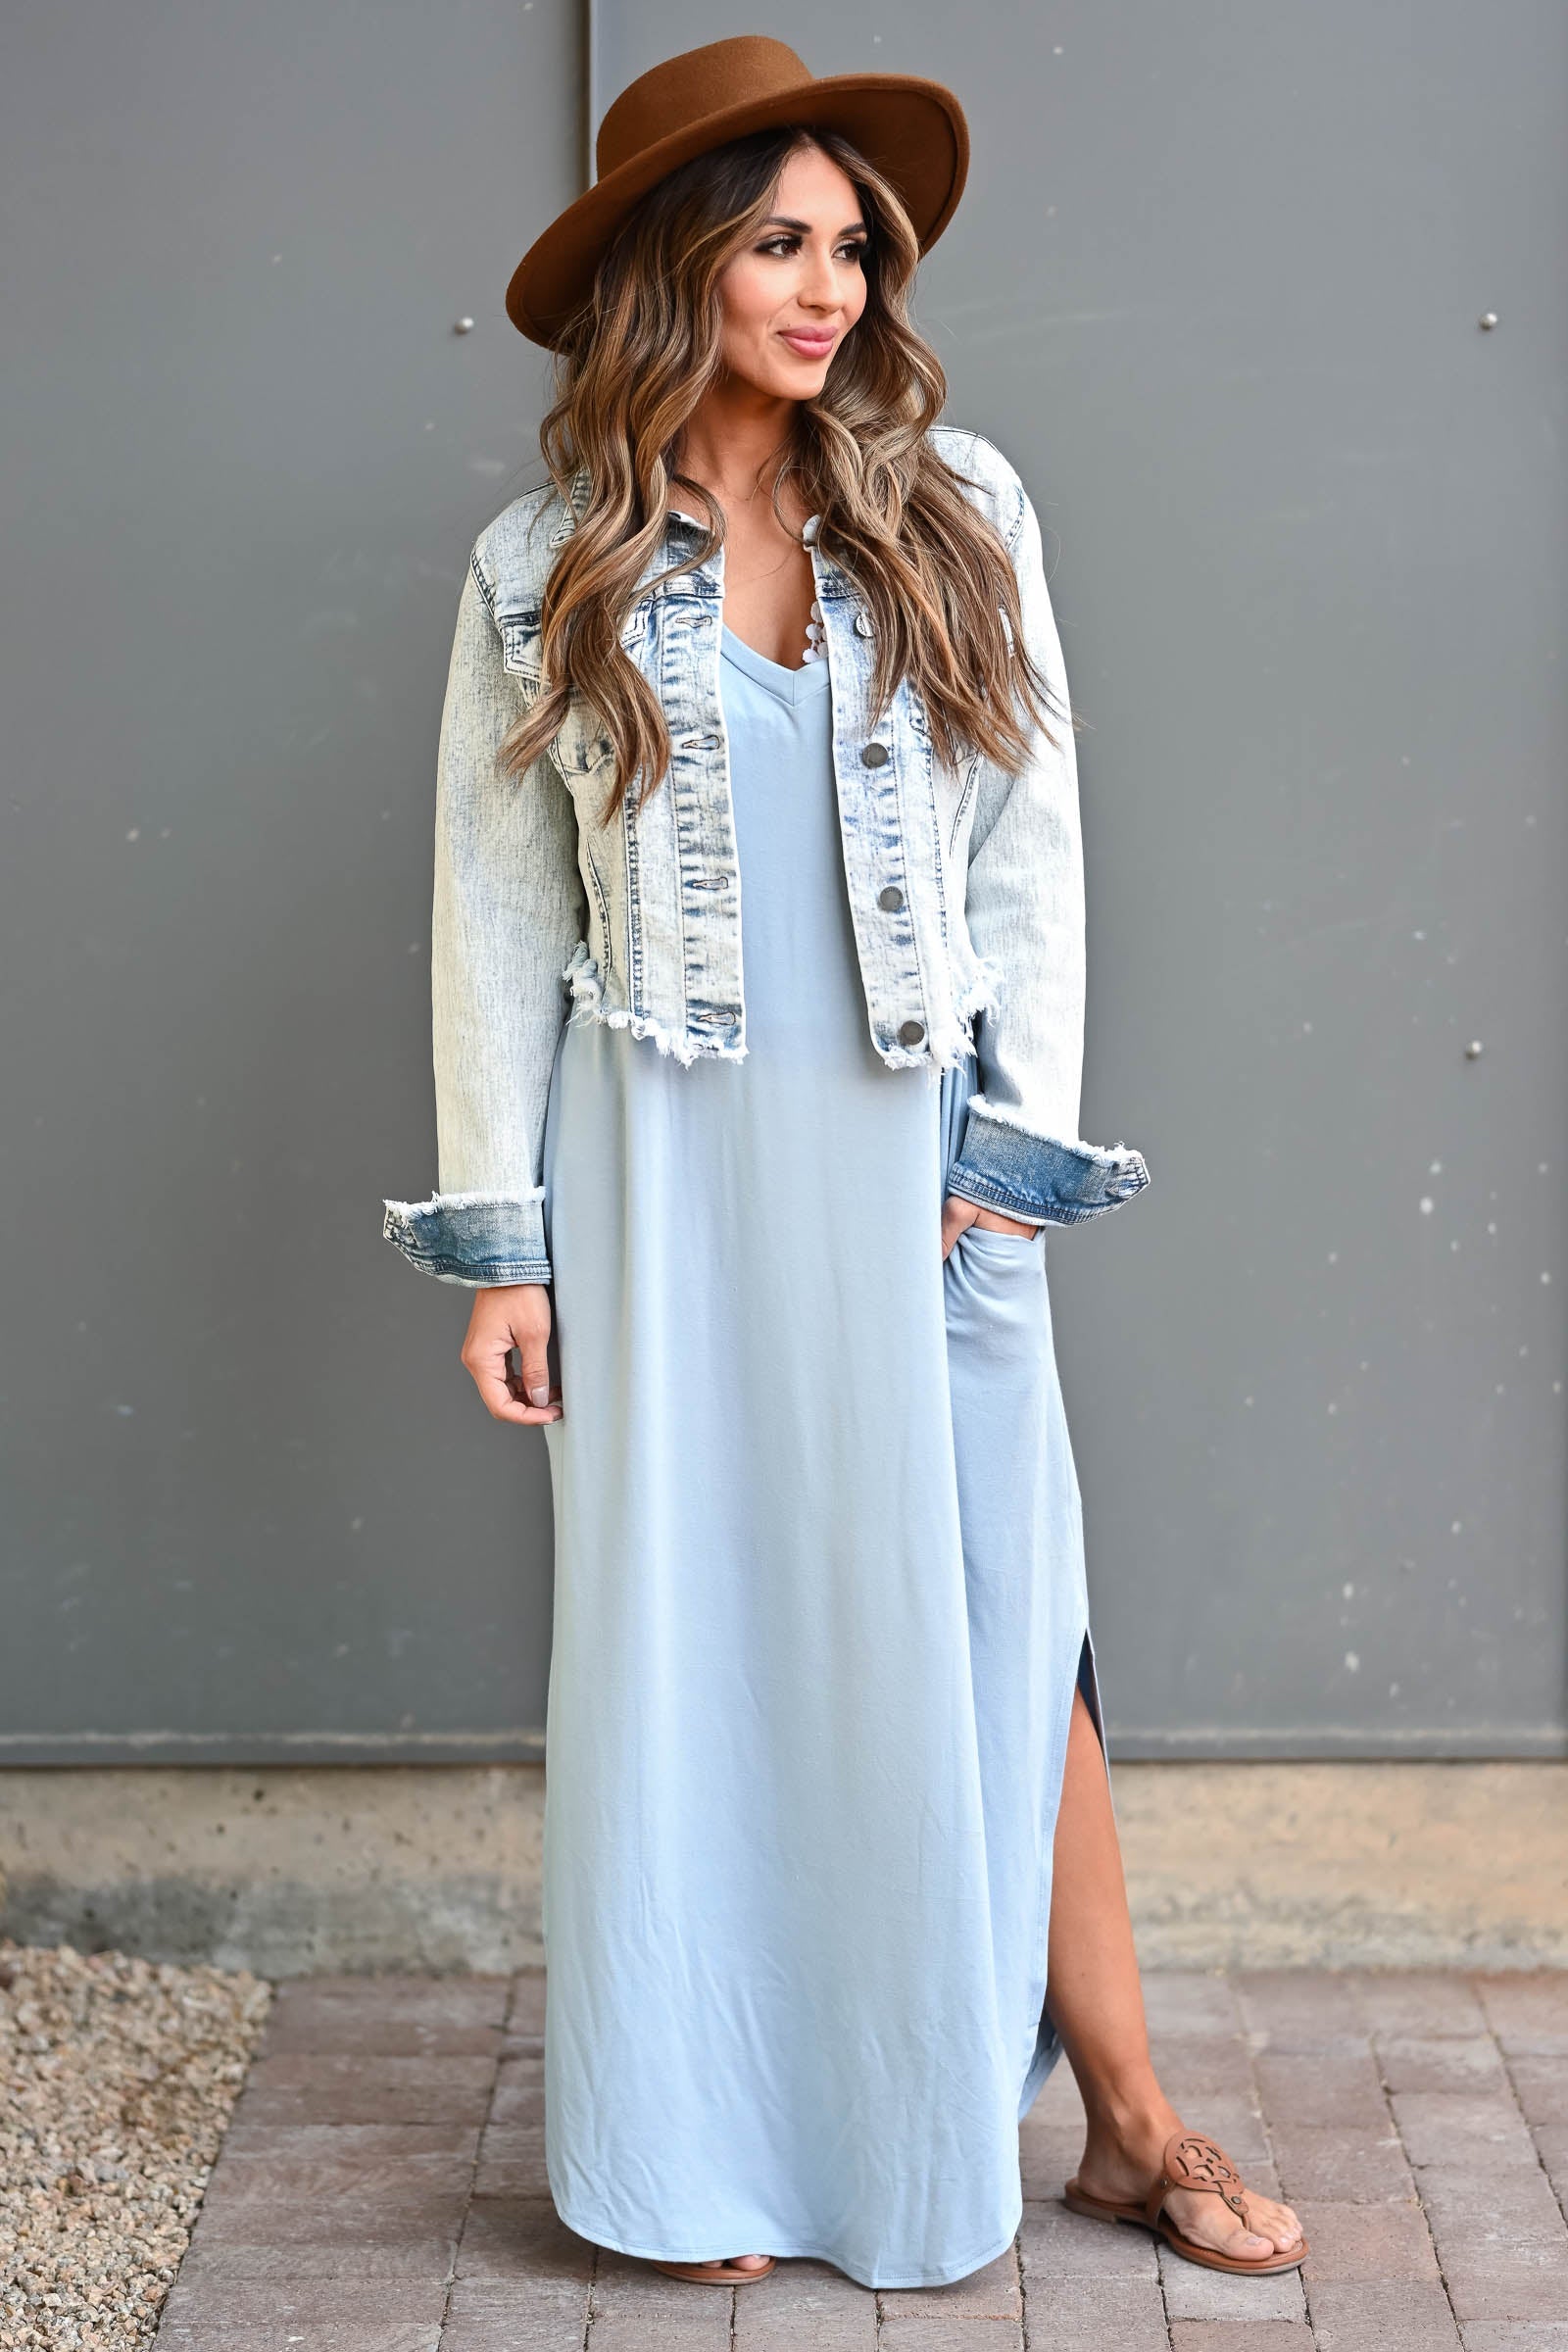 I'll Be By The Pool Maxi Dress - Sky Blue, Closet Candy, 1